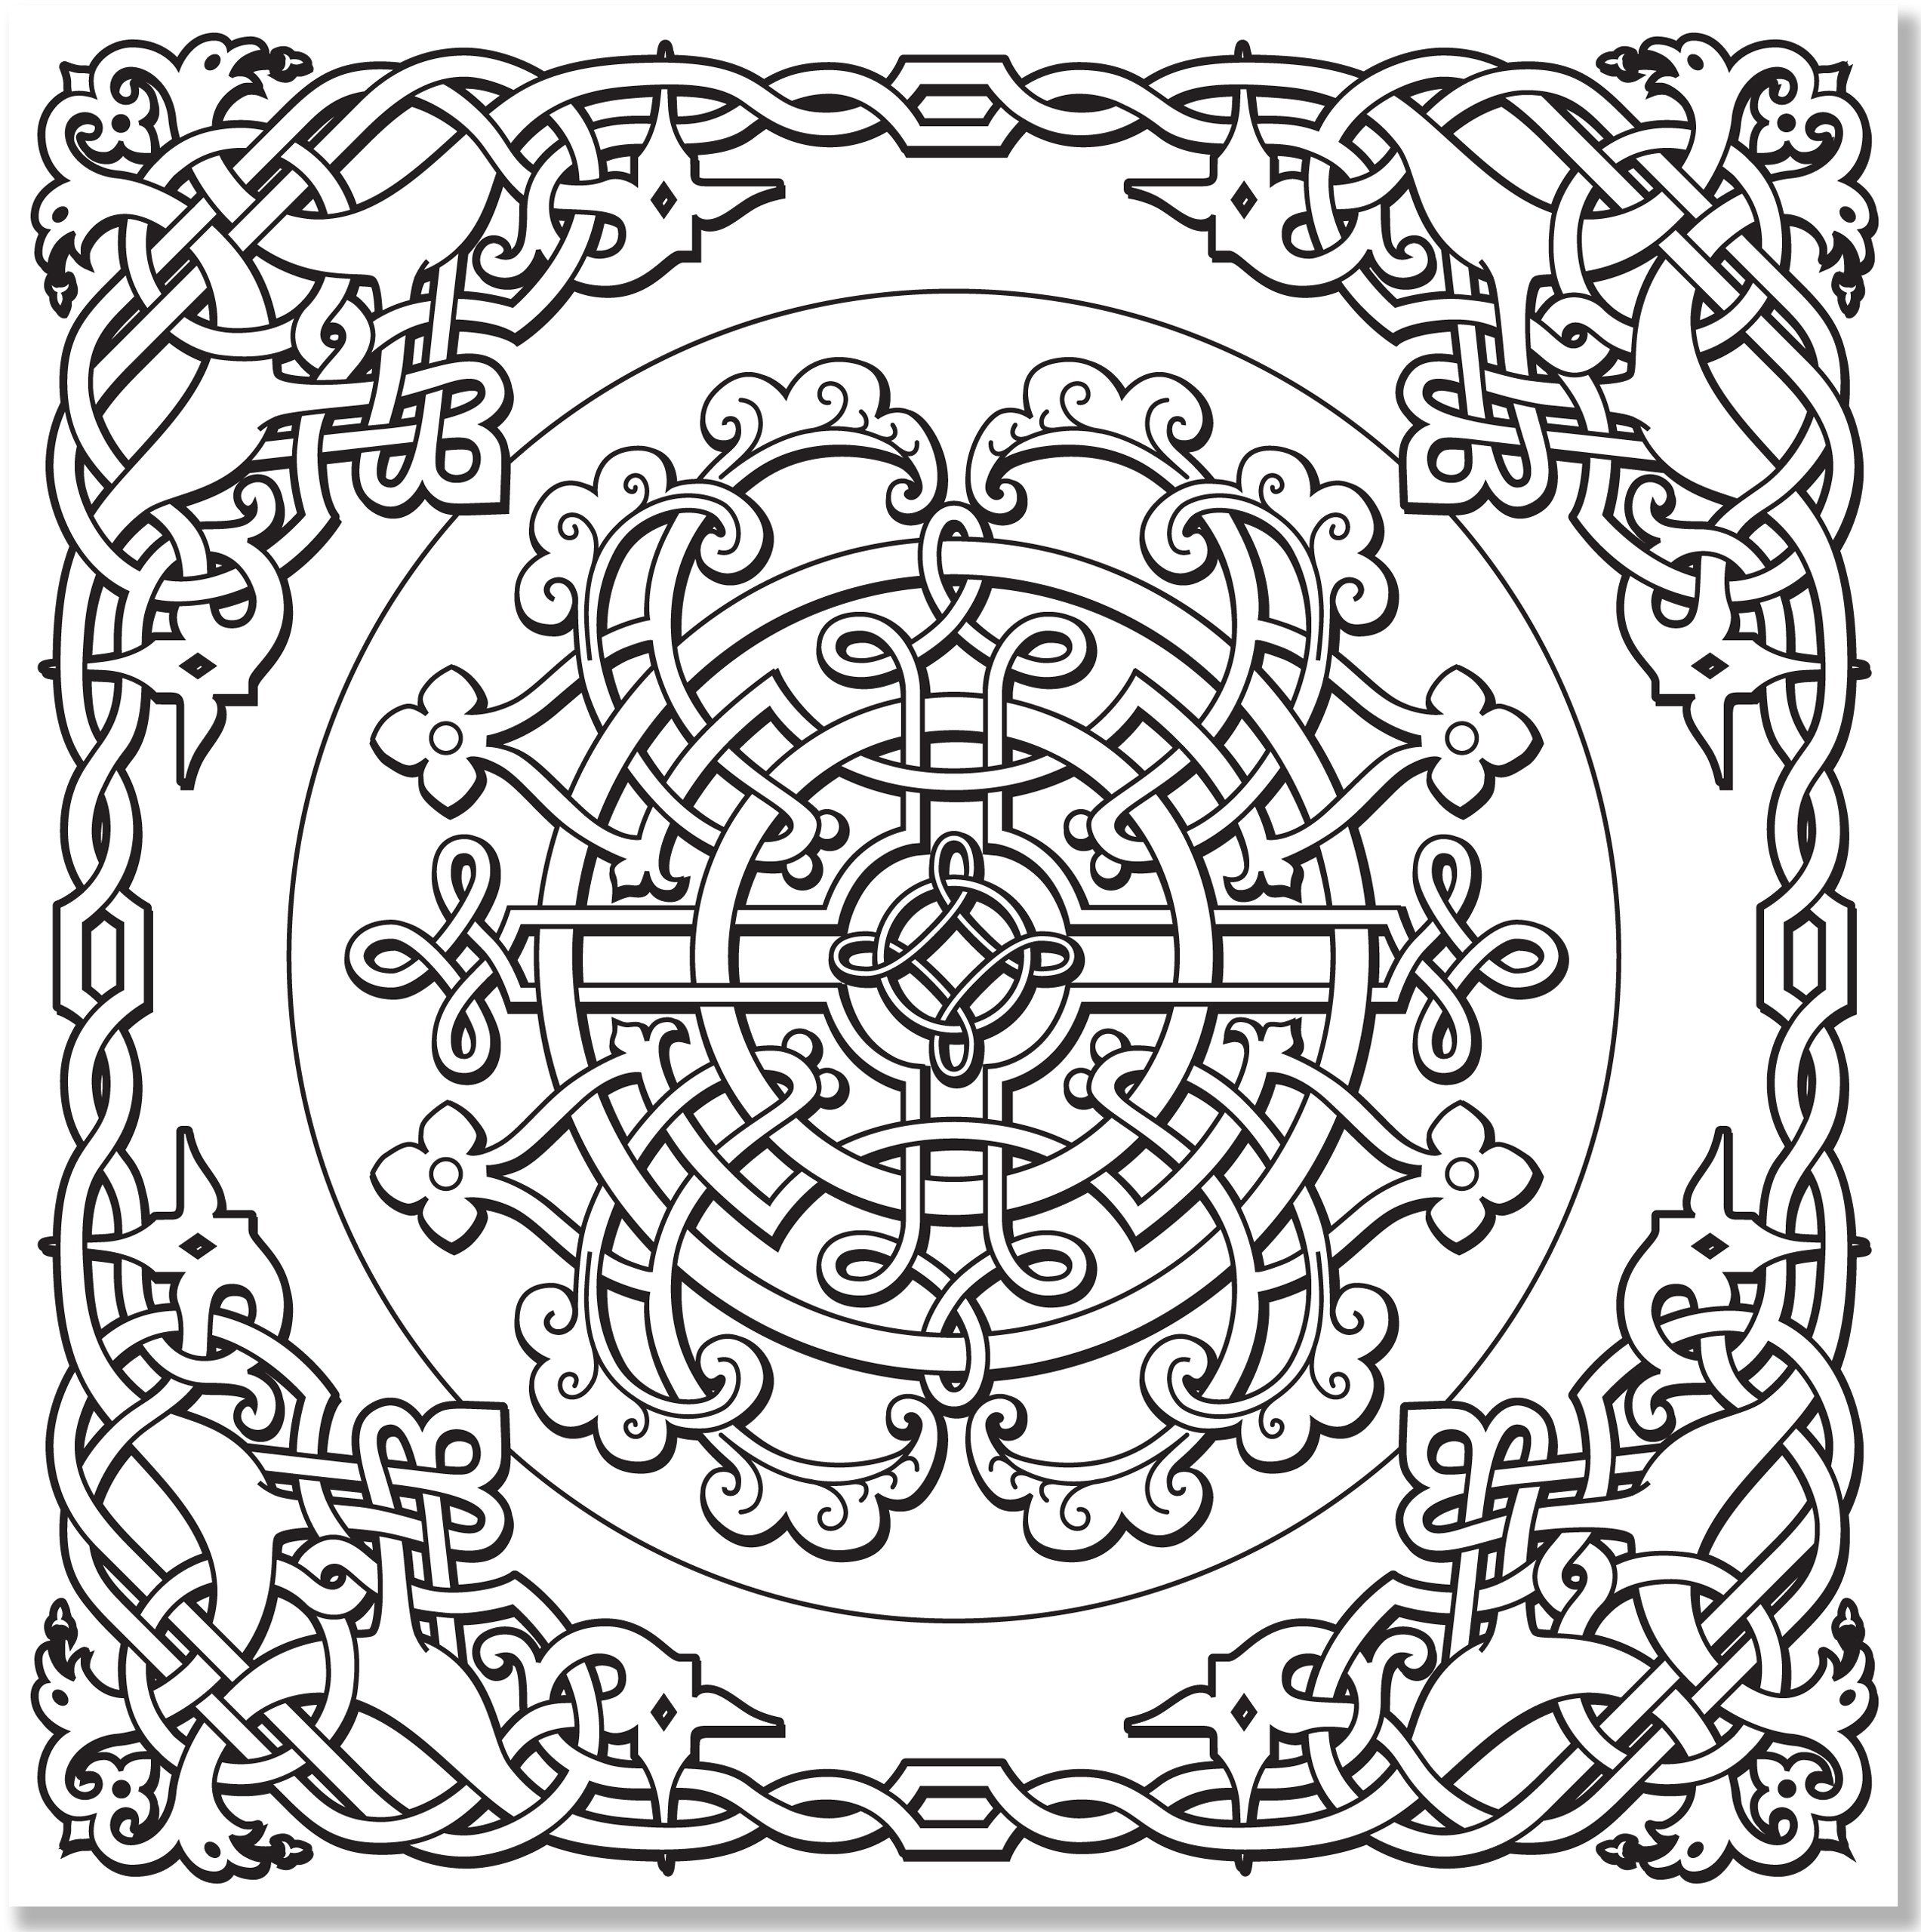 Coloring Pages To Print Celtic Designs - Coloring Home